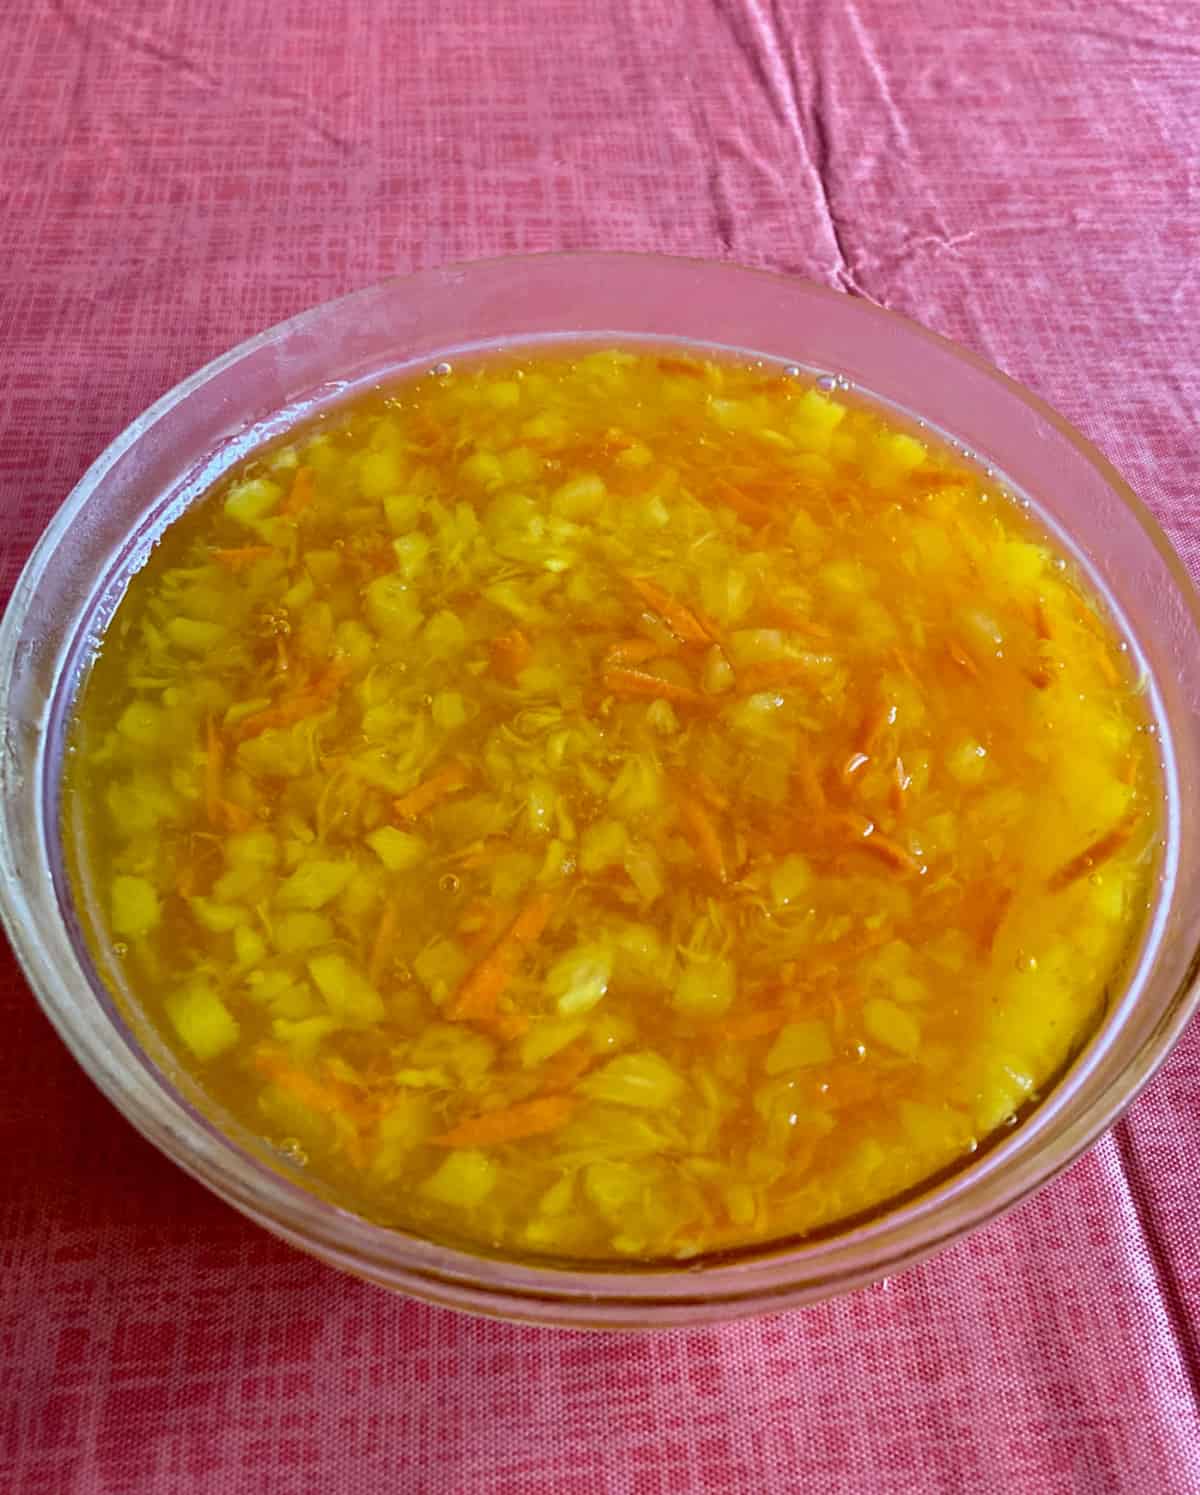 Refrigerated Sunshine Salad with lemon gelatin, shredded carrots and crushed pineapple in glass bowl.